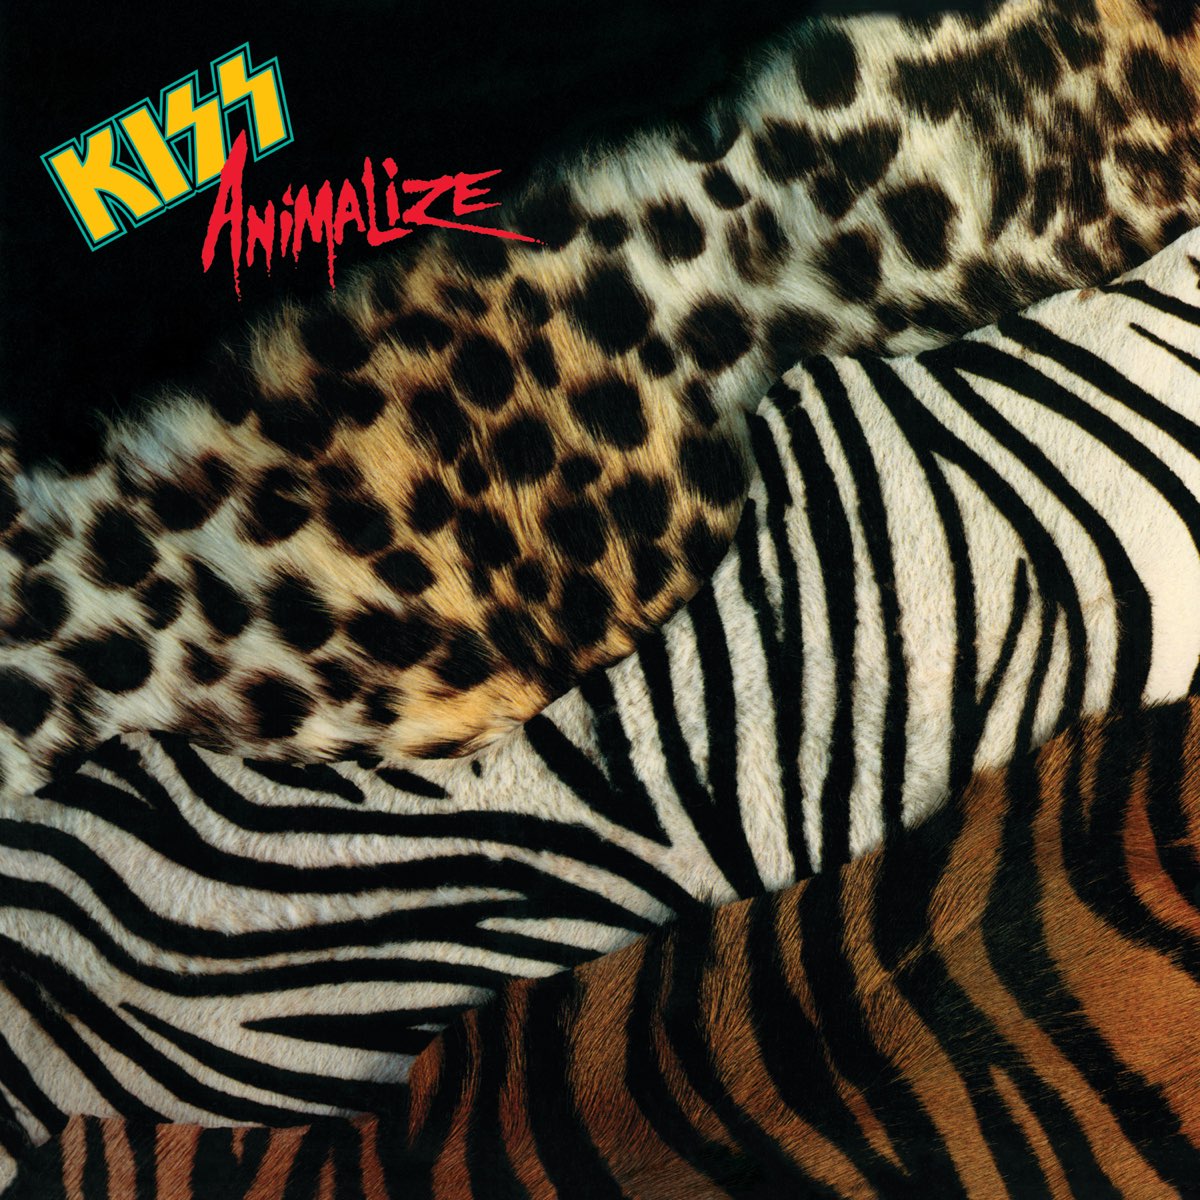 Animalize - Album by Kiss - Apple Music